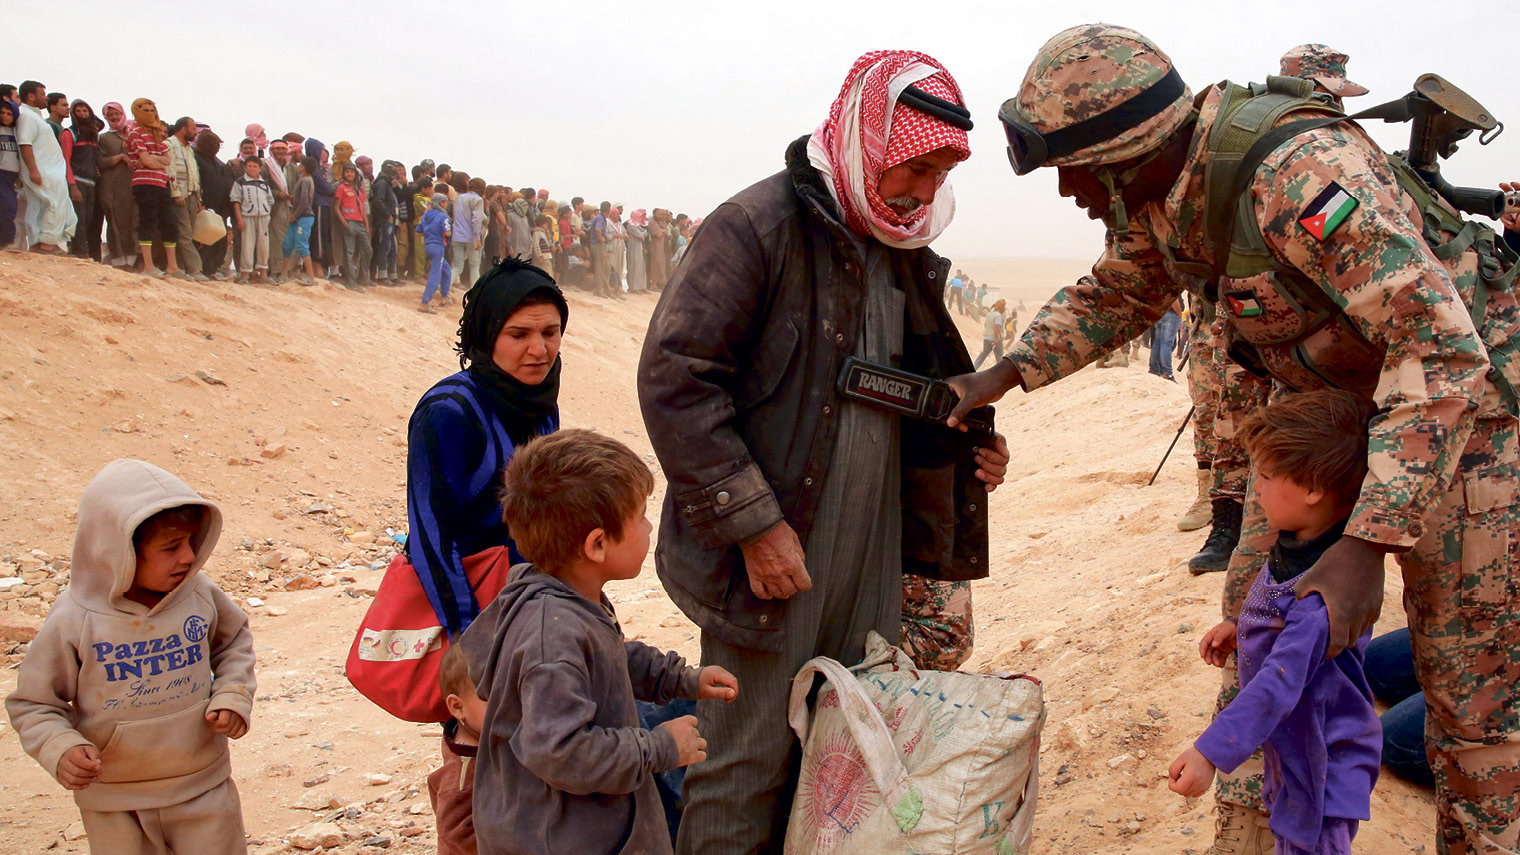 A Jordanian soldier scans newly arrived Syrian refugees as they wait to cross the border - KHALIL MAZRAAWI/AFP/Getty Images